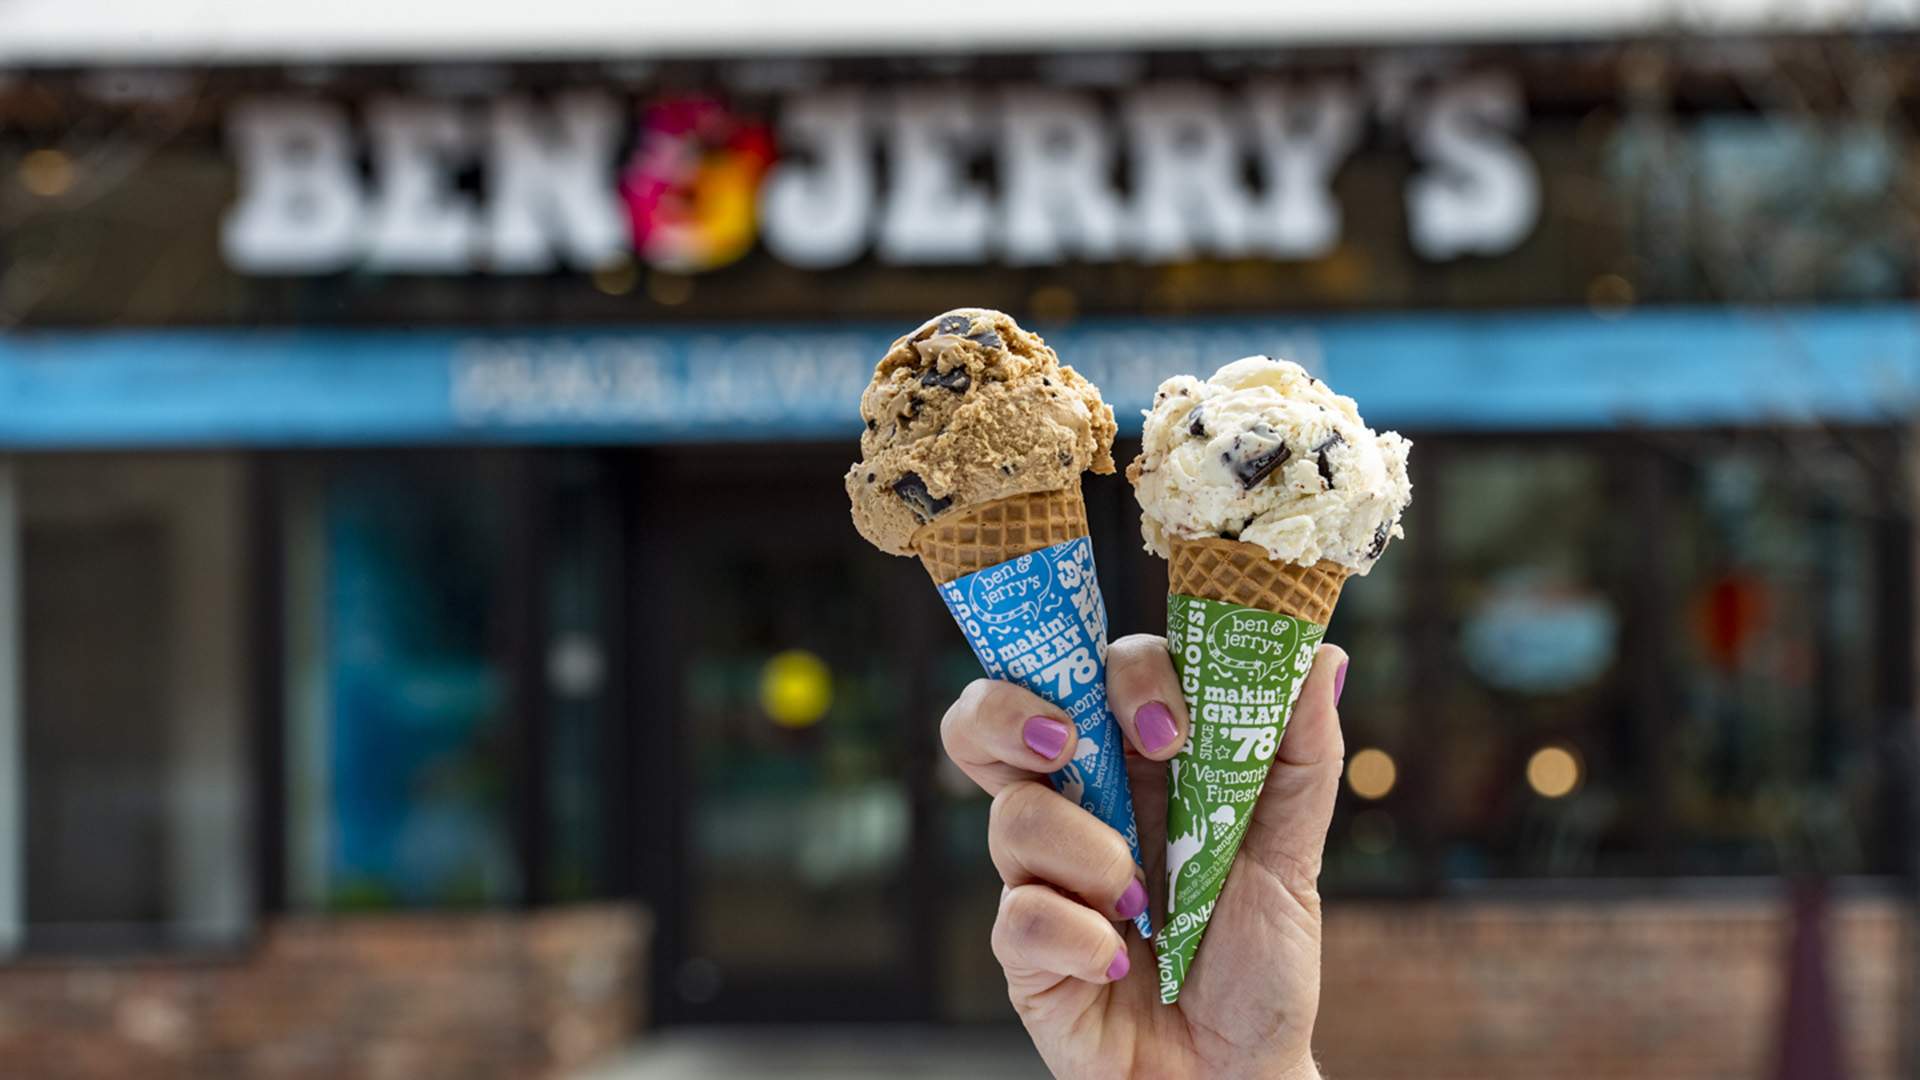 Ben & Jerry's Is Bringing Back Free Cone Day for the First Time Since 2019